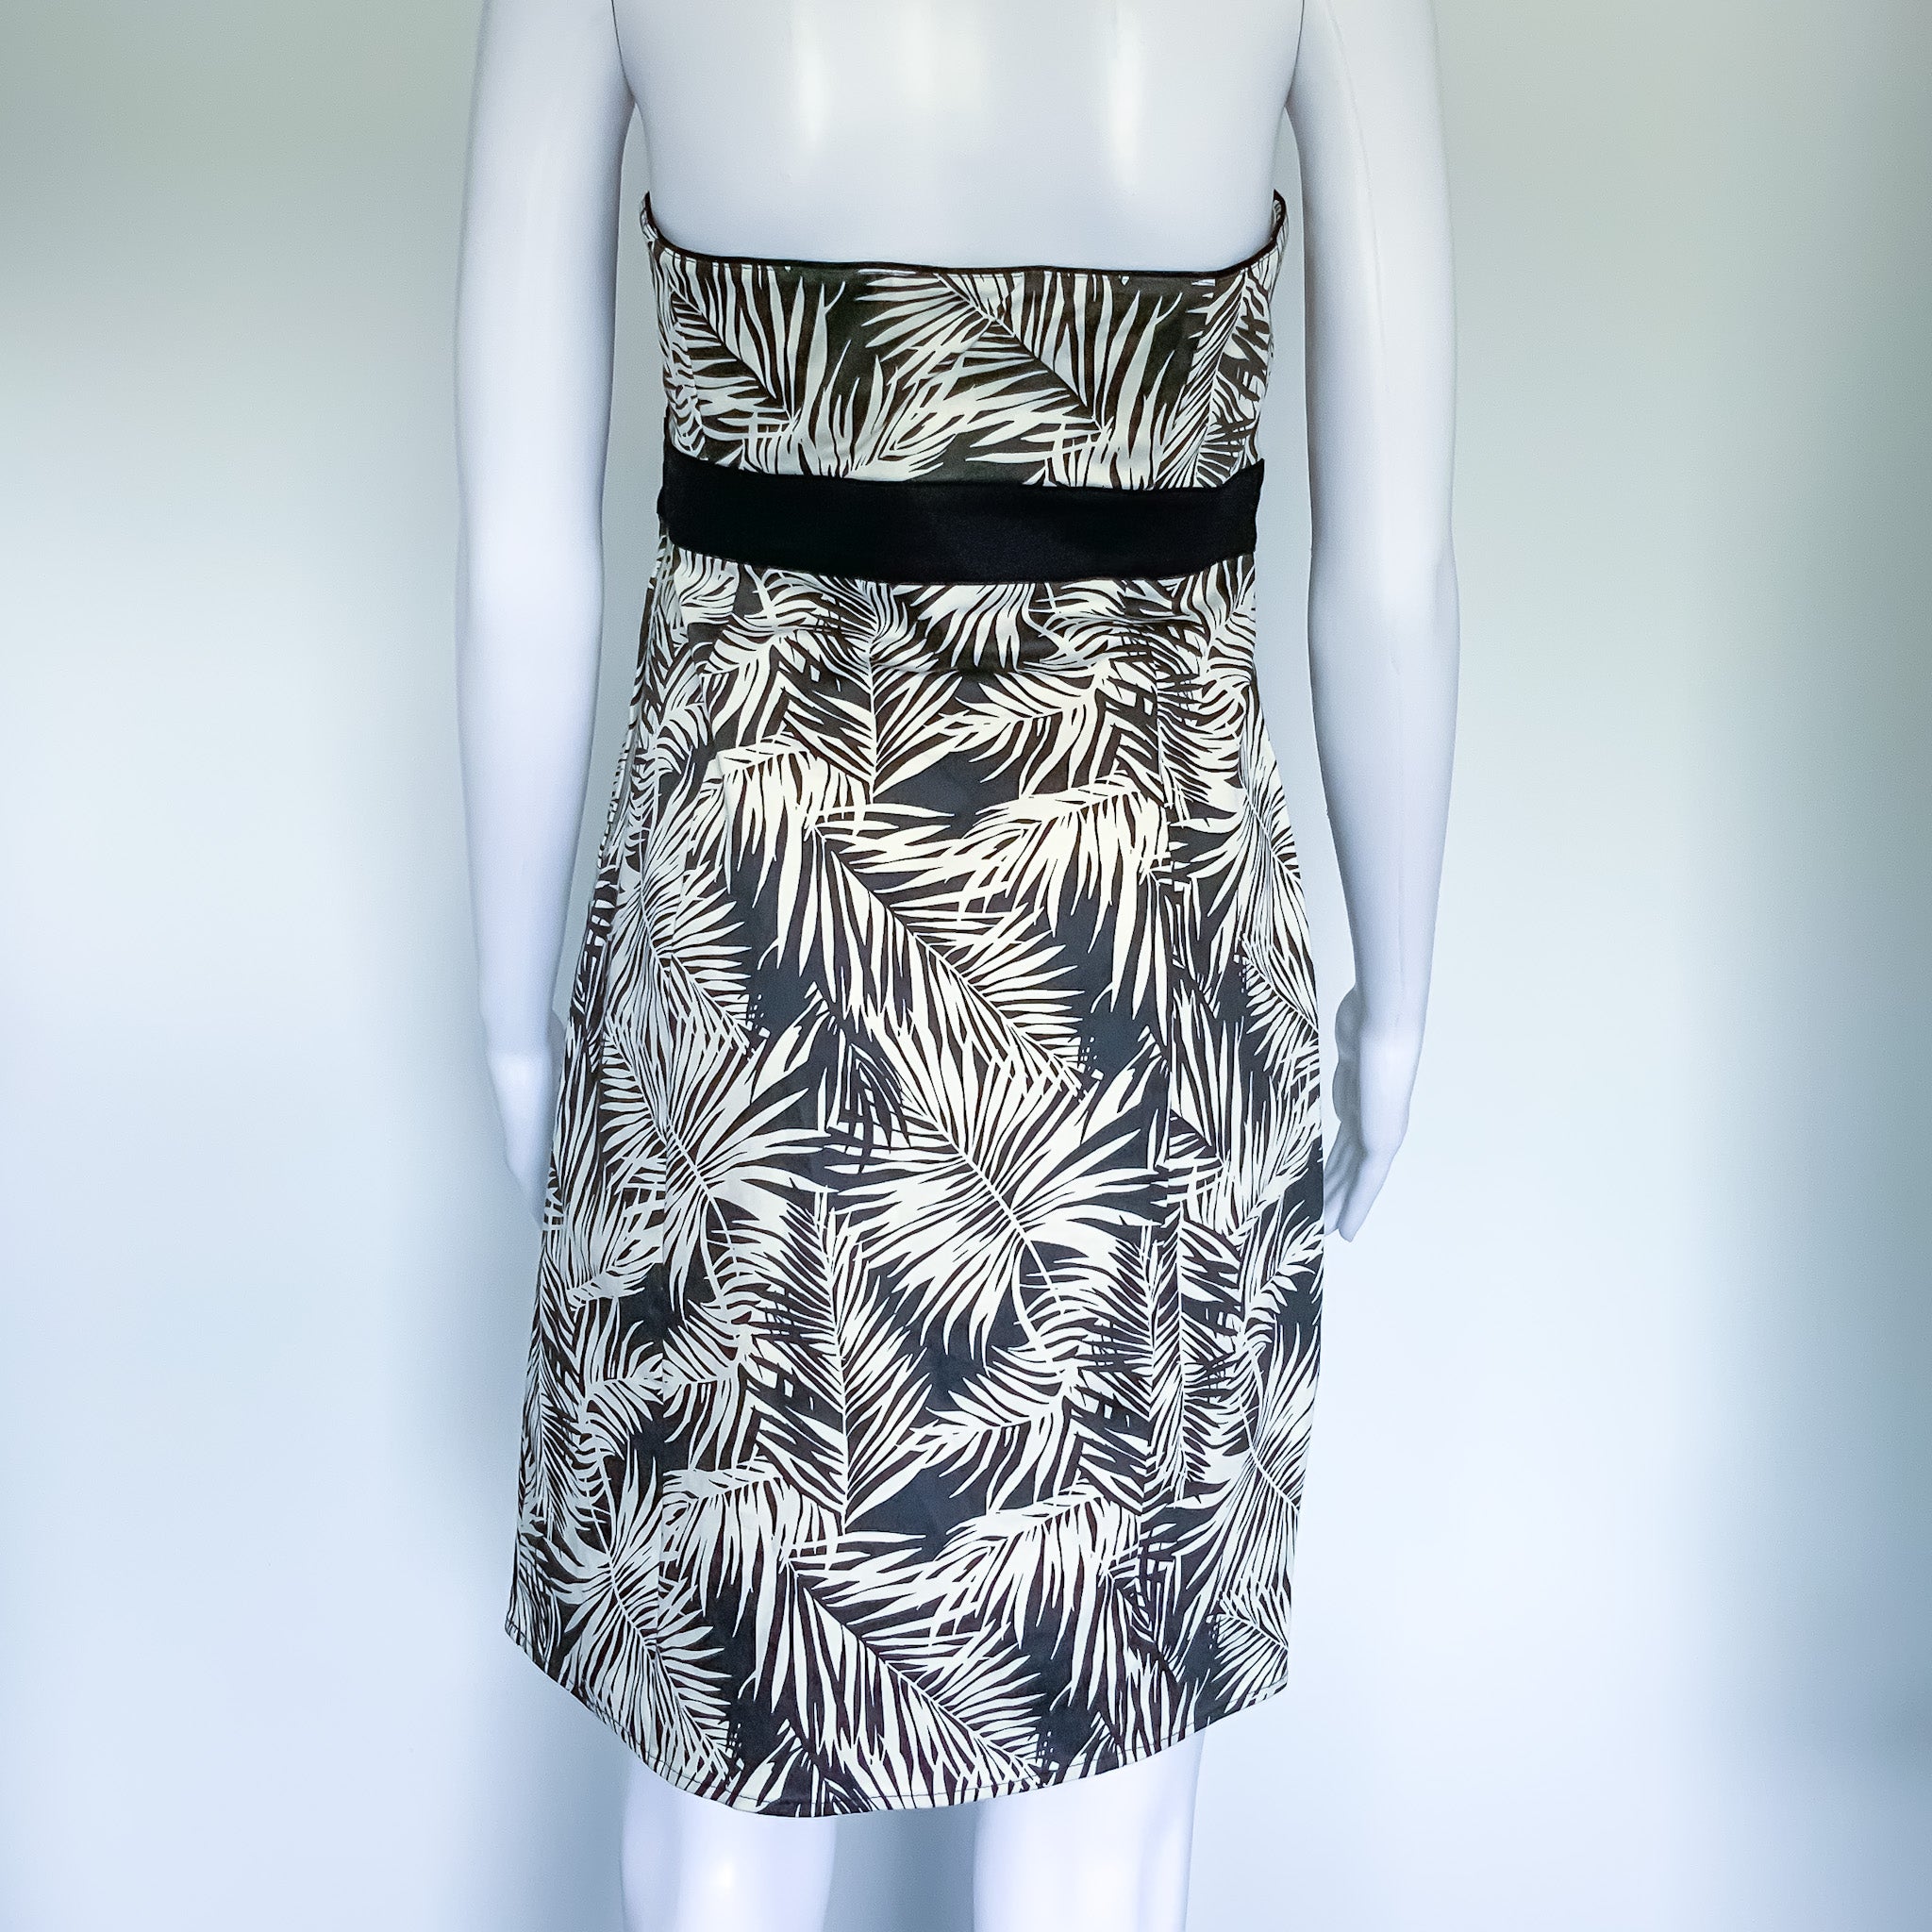 H&M Tropical Tropical Leaf Print Strapless Cocktail Dress - Size 12